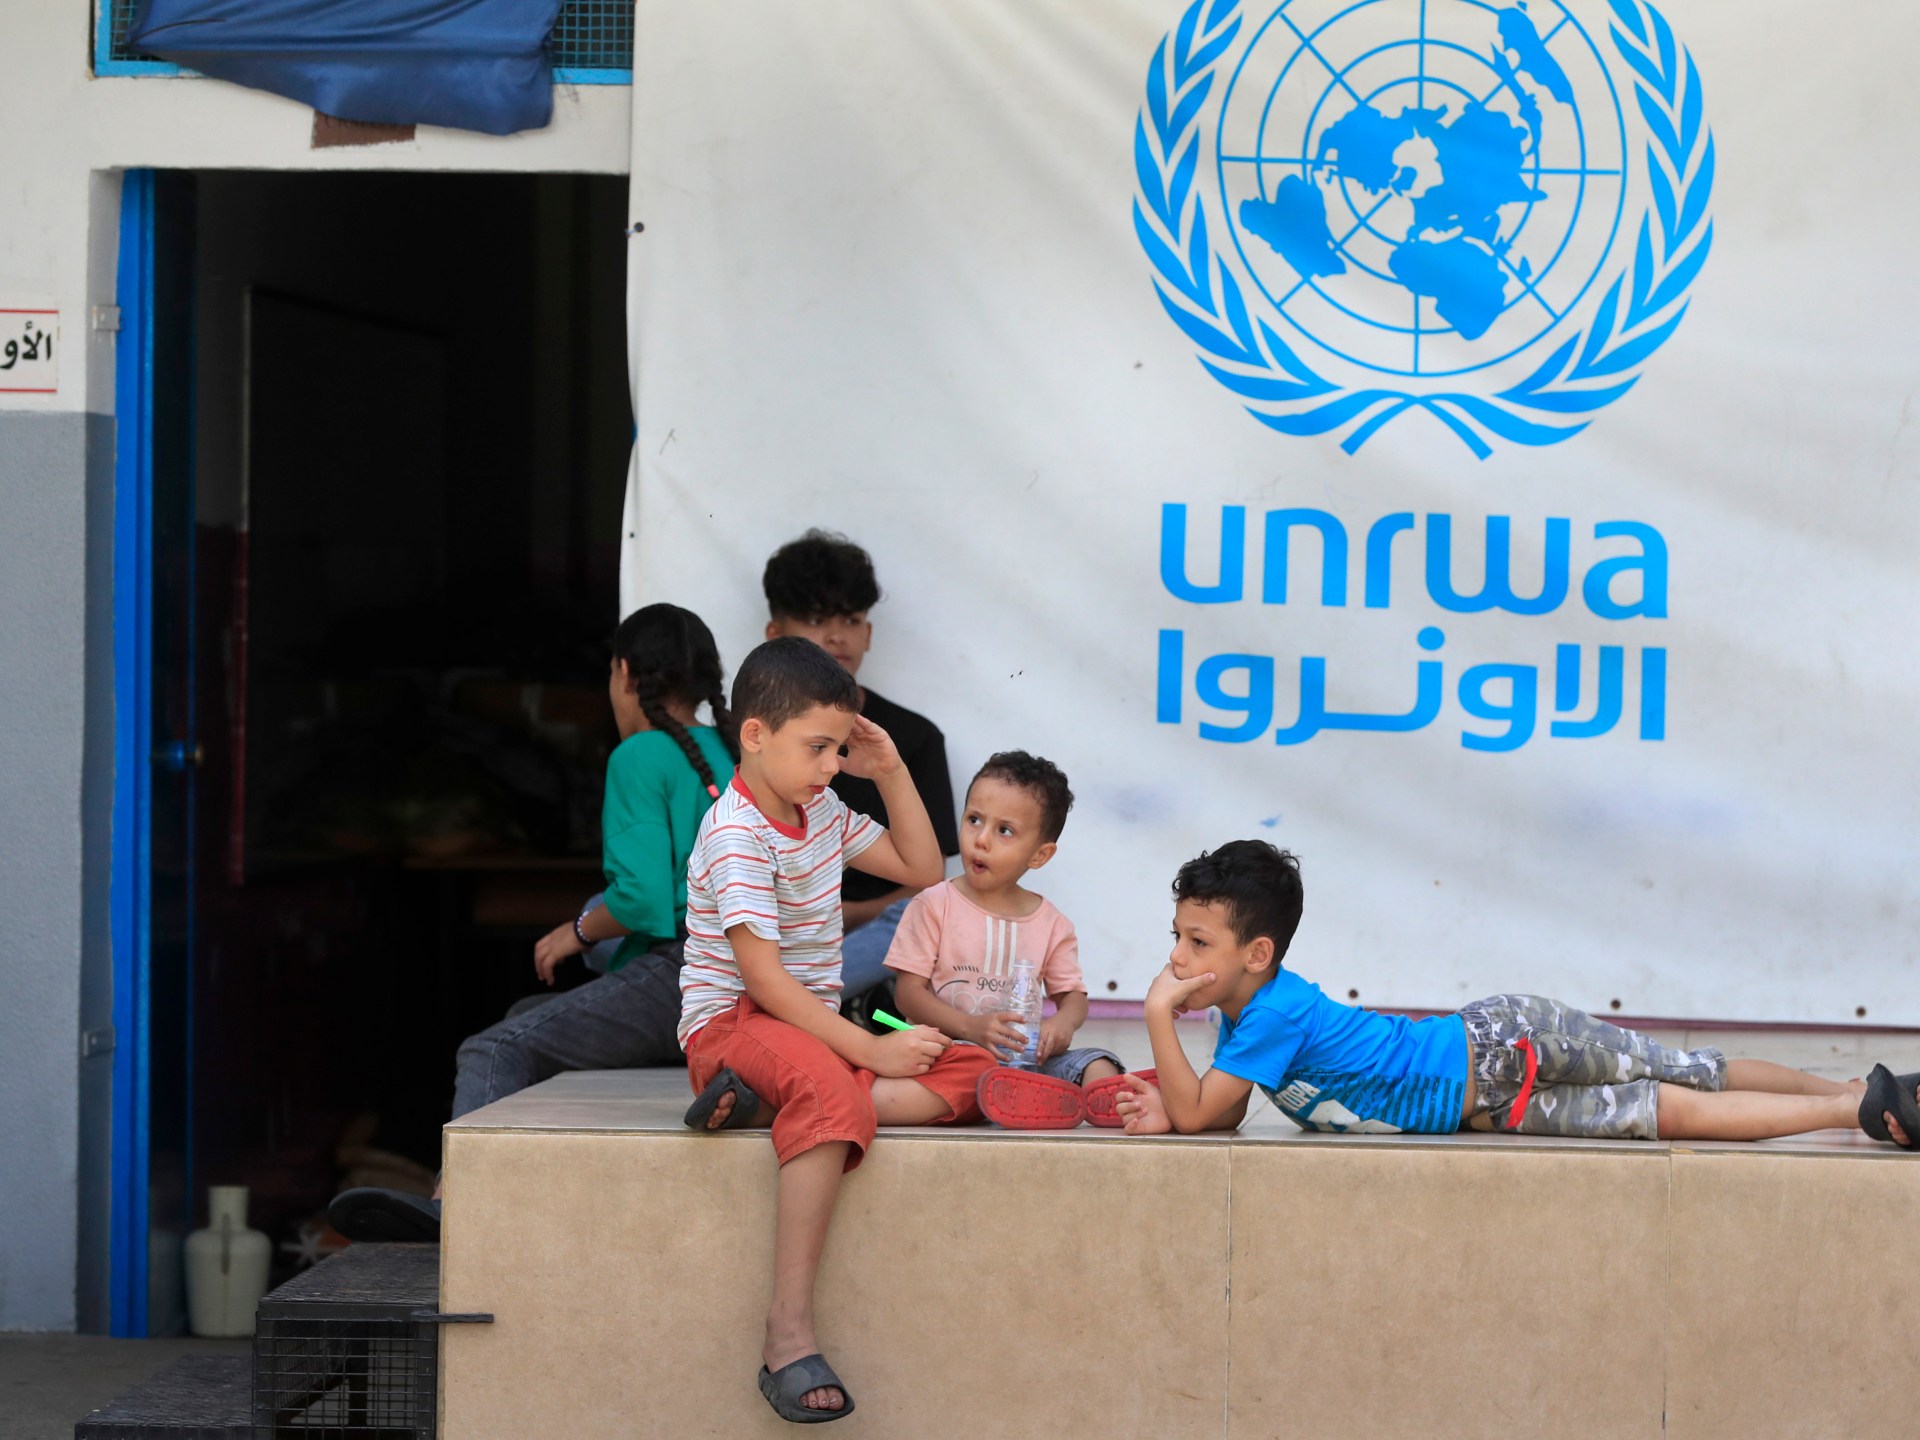 Israel failed to support its claims about UNRWA staff, report finds | Newsfeed